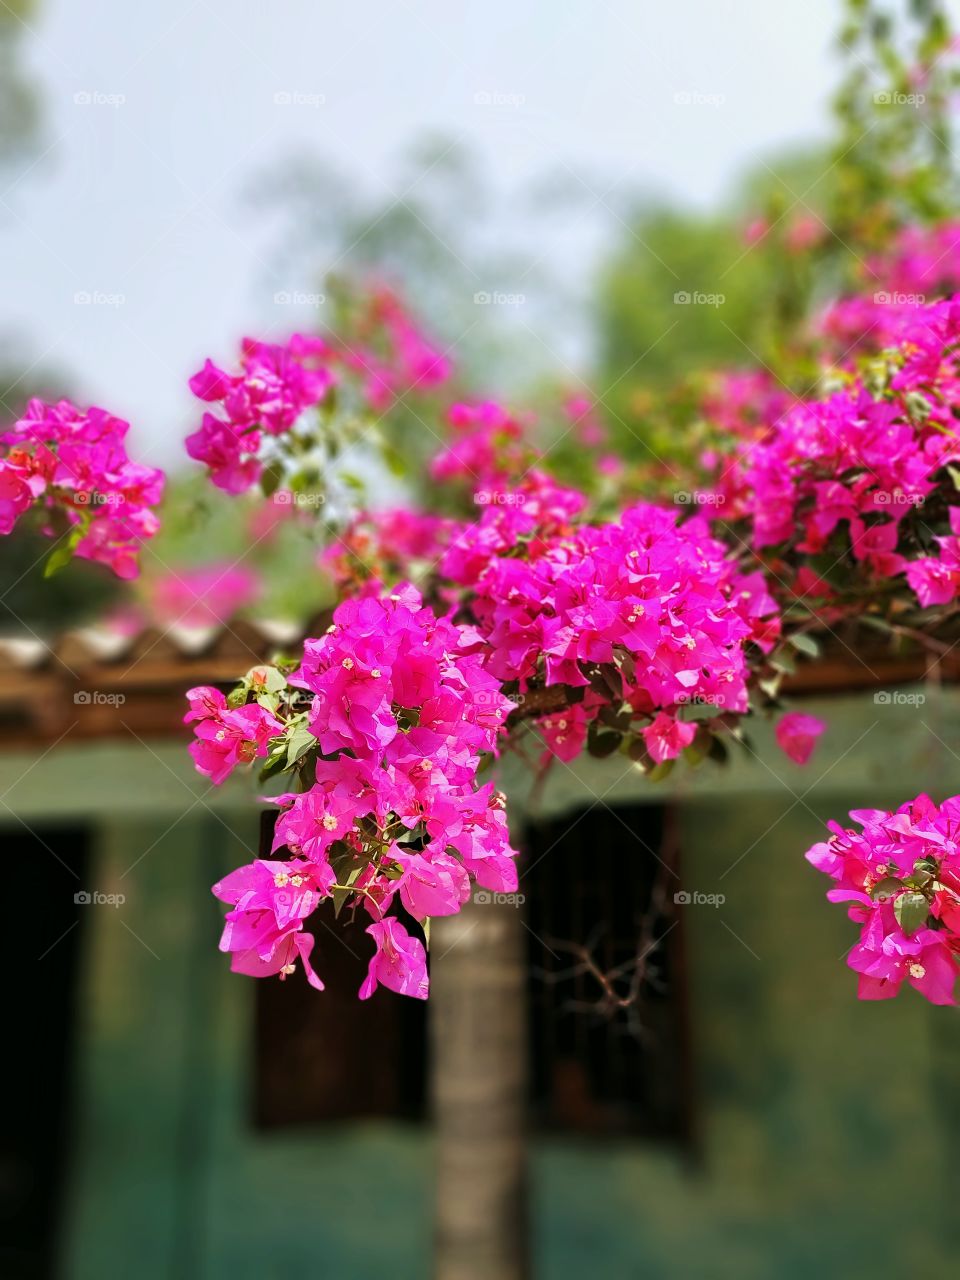 Bougainvillea - বাগানবিলাস / কাগফুল / পাতাবাহার

Bougainvillea is a genus of thorny ornamental vines, bushes, or trees. The inflorescence consists of large
 colourful sepallike bracts which surround three simple waxy flowers. It has 18 category.